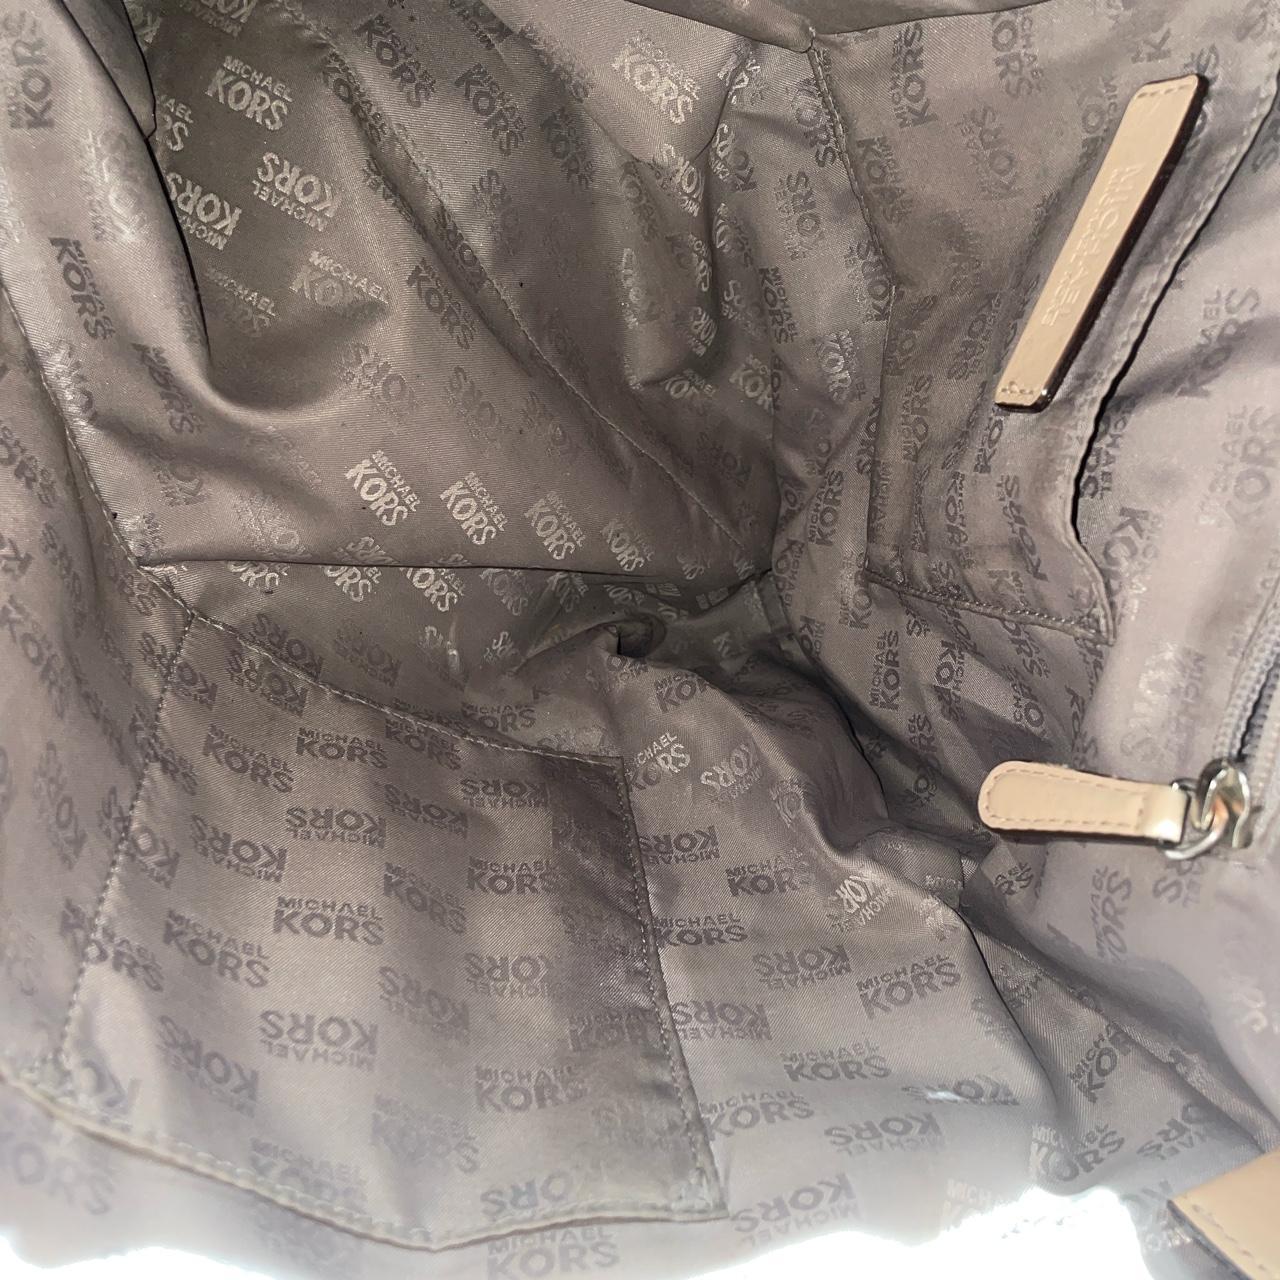 Authentic Michael Kors Never-full bag with large - Depop